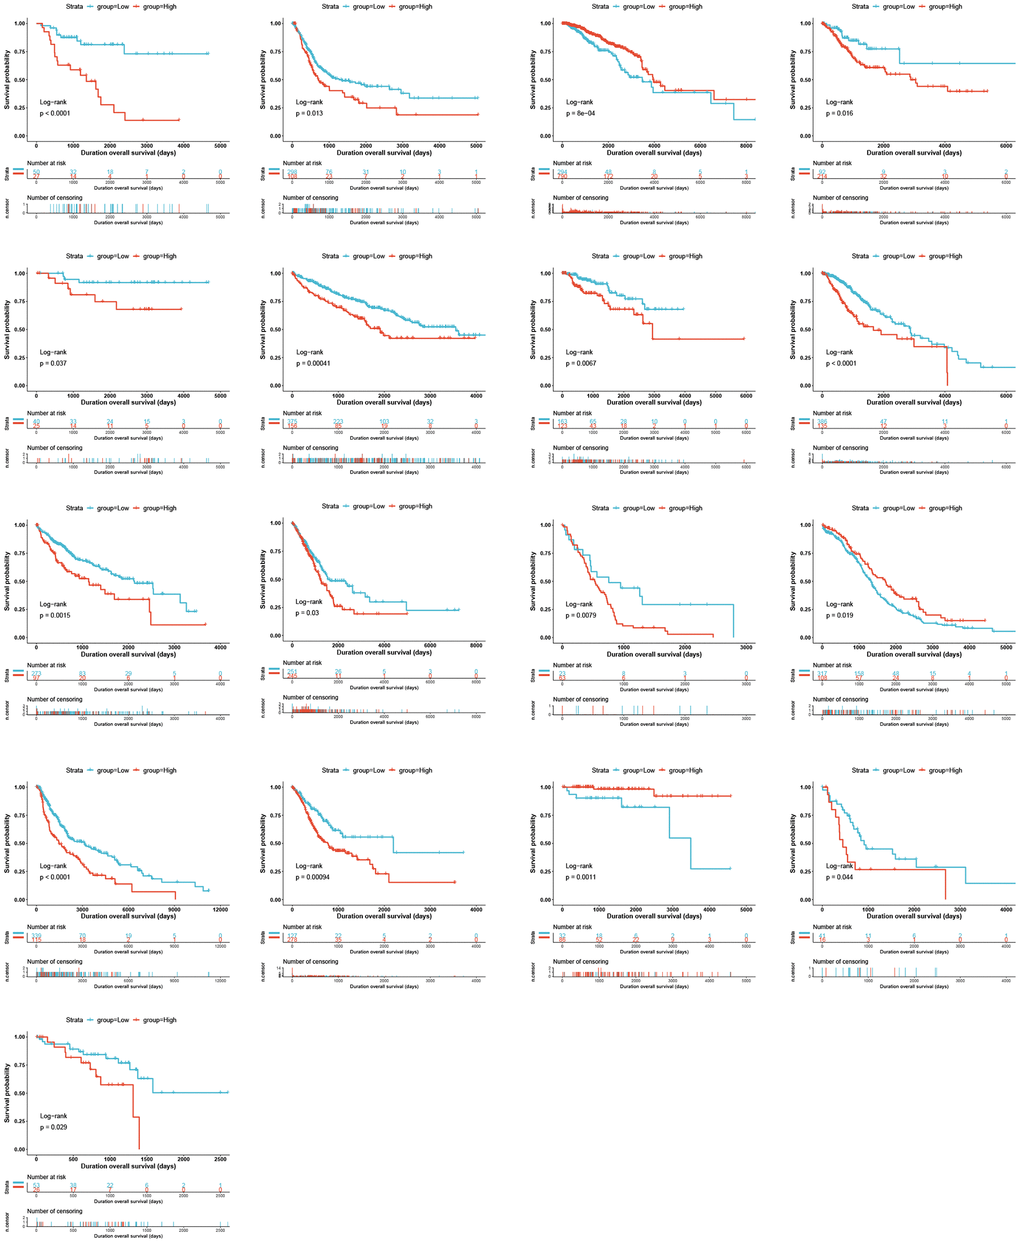 Kaplan–Meier OS curves for patients stratified by different expression levels of GLI1 in seventeen cancer types.